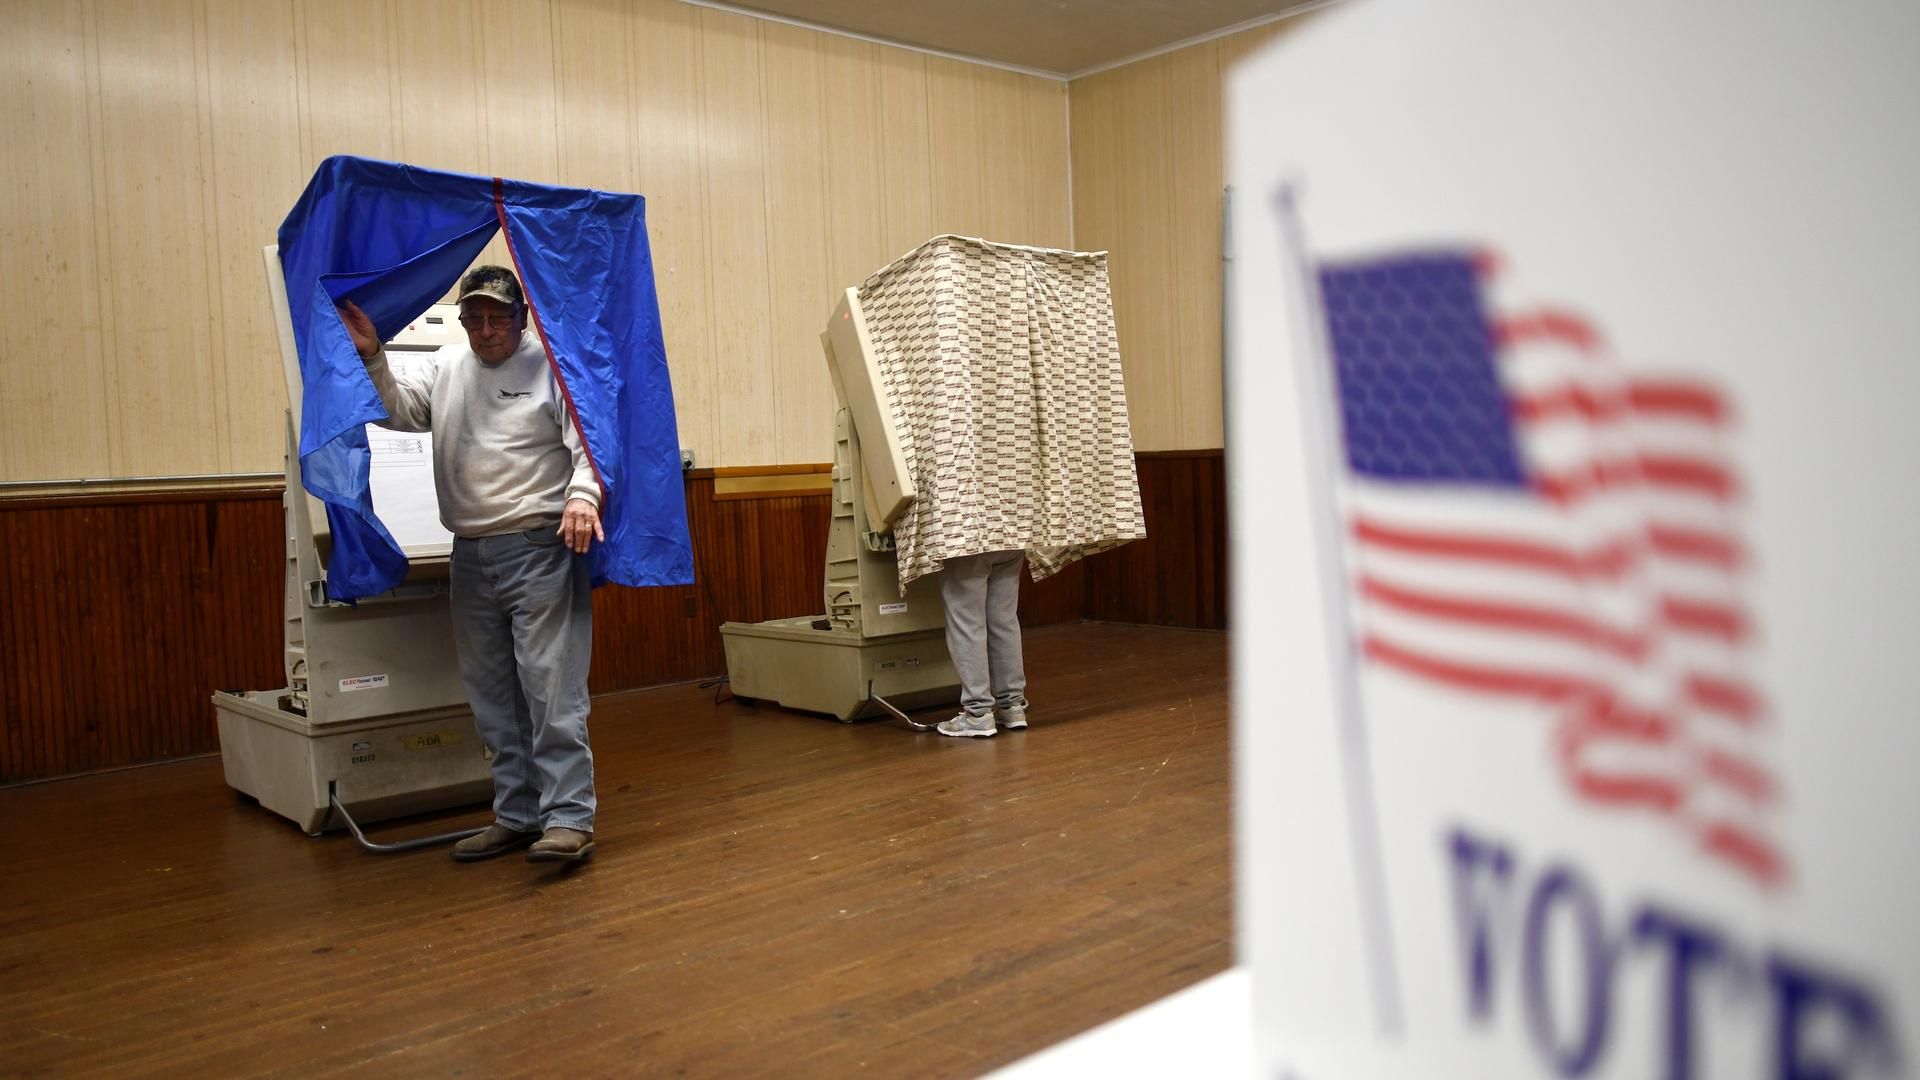 A man leaves a voting booth 